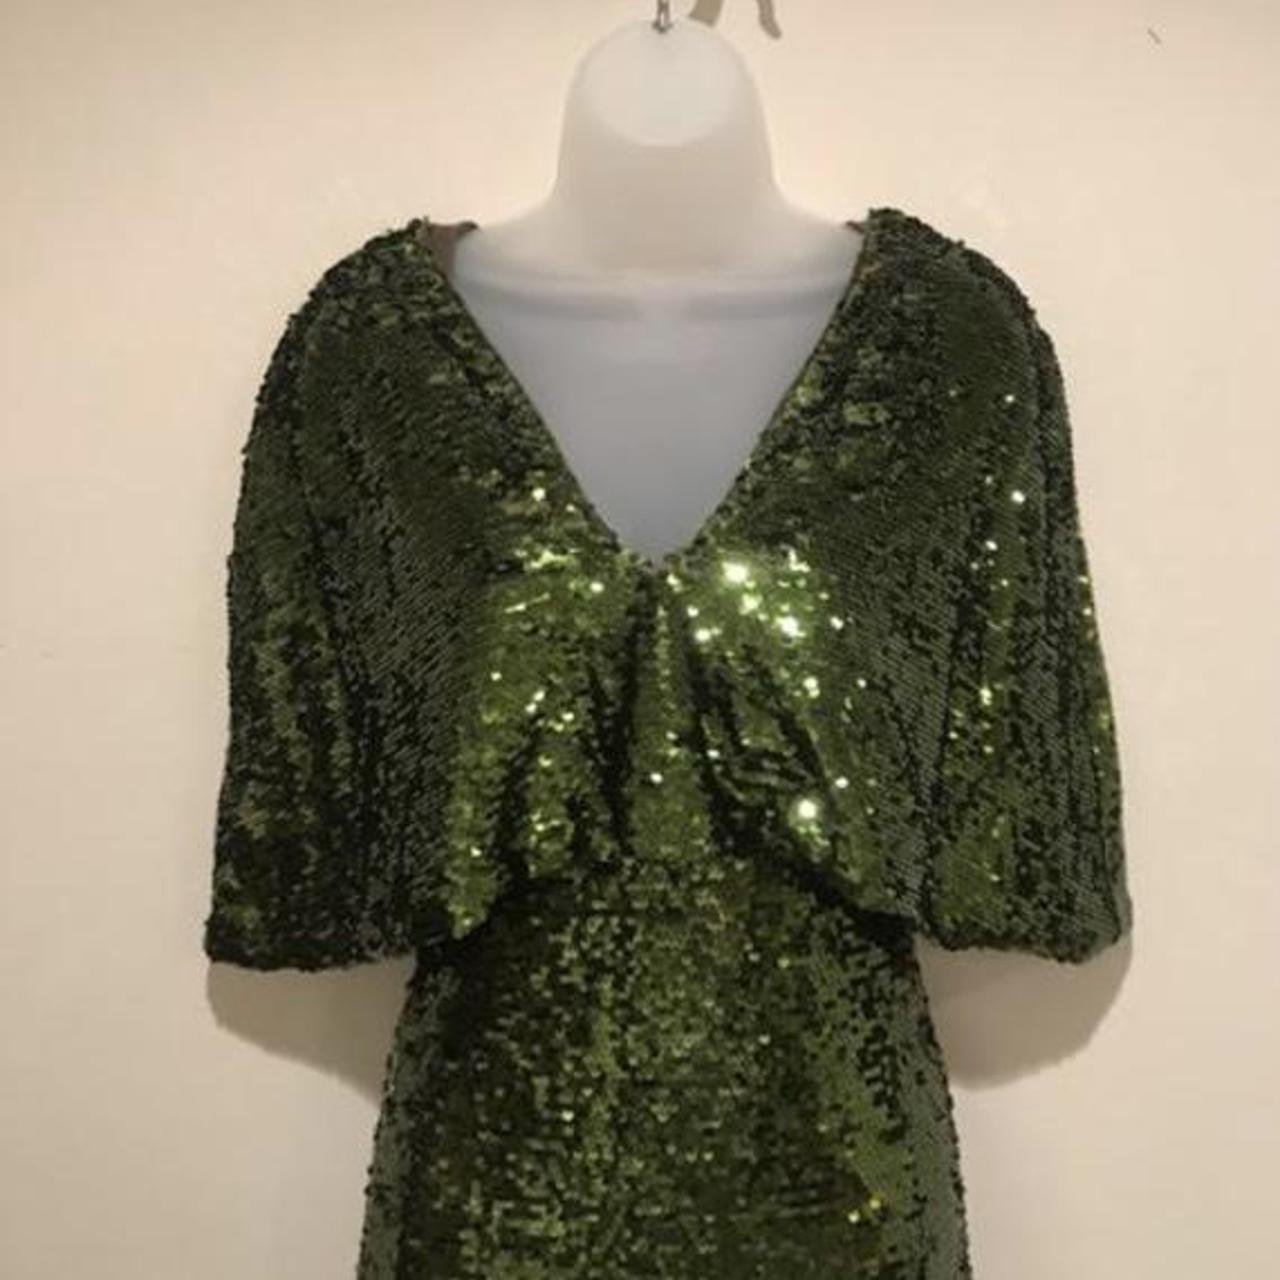 Product Image 2 - Green sequin old Hollywood style